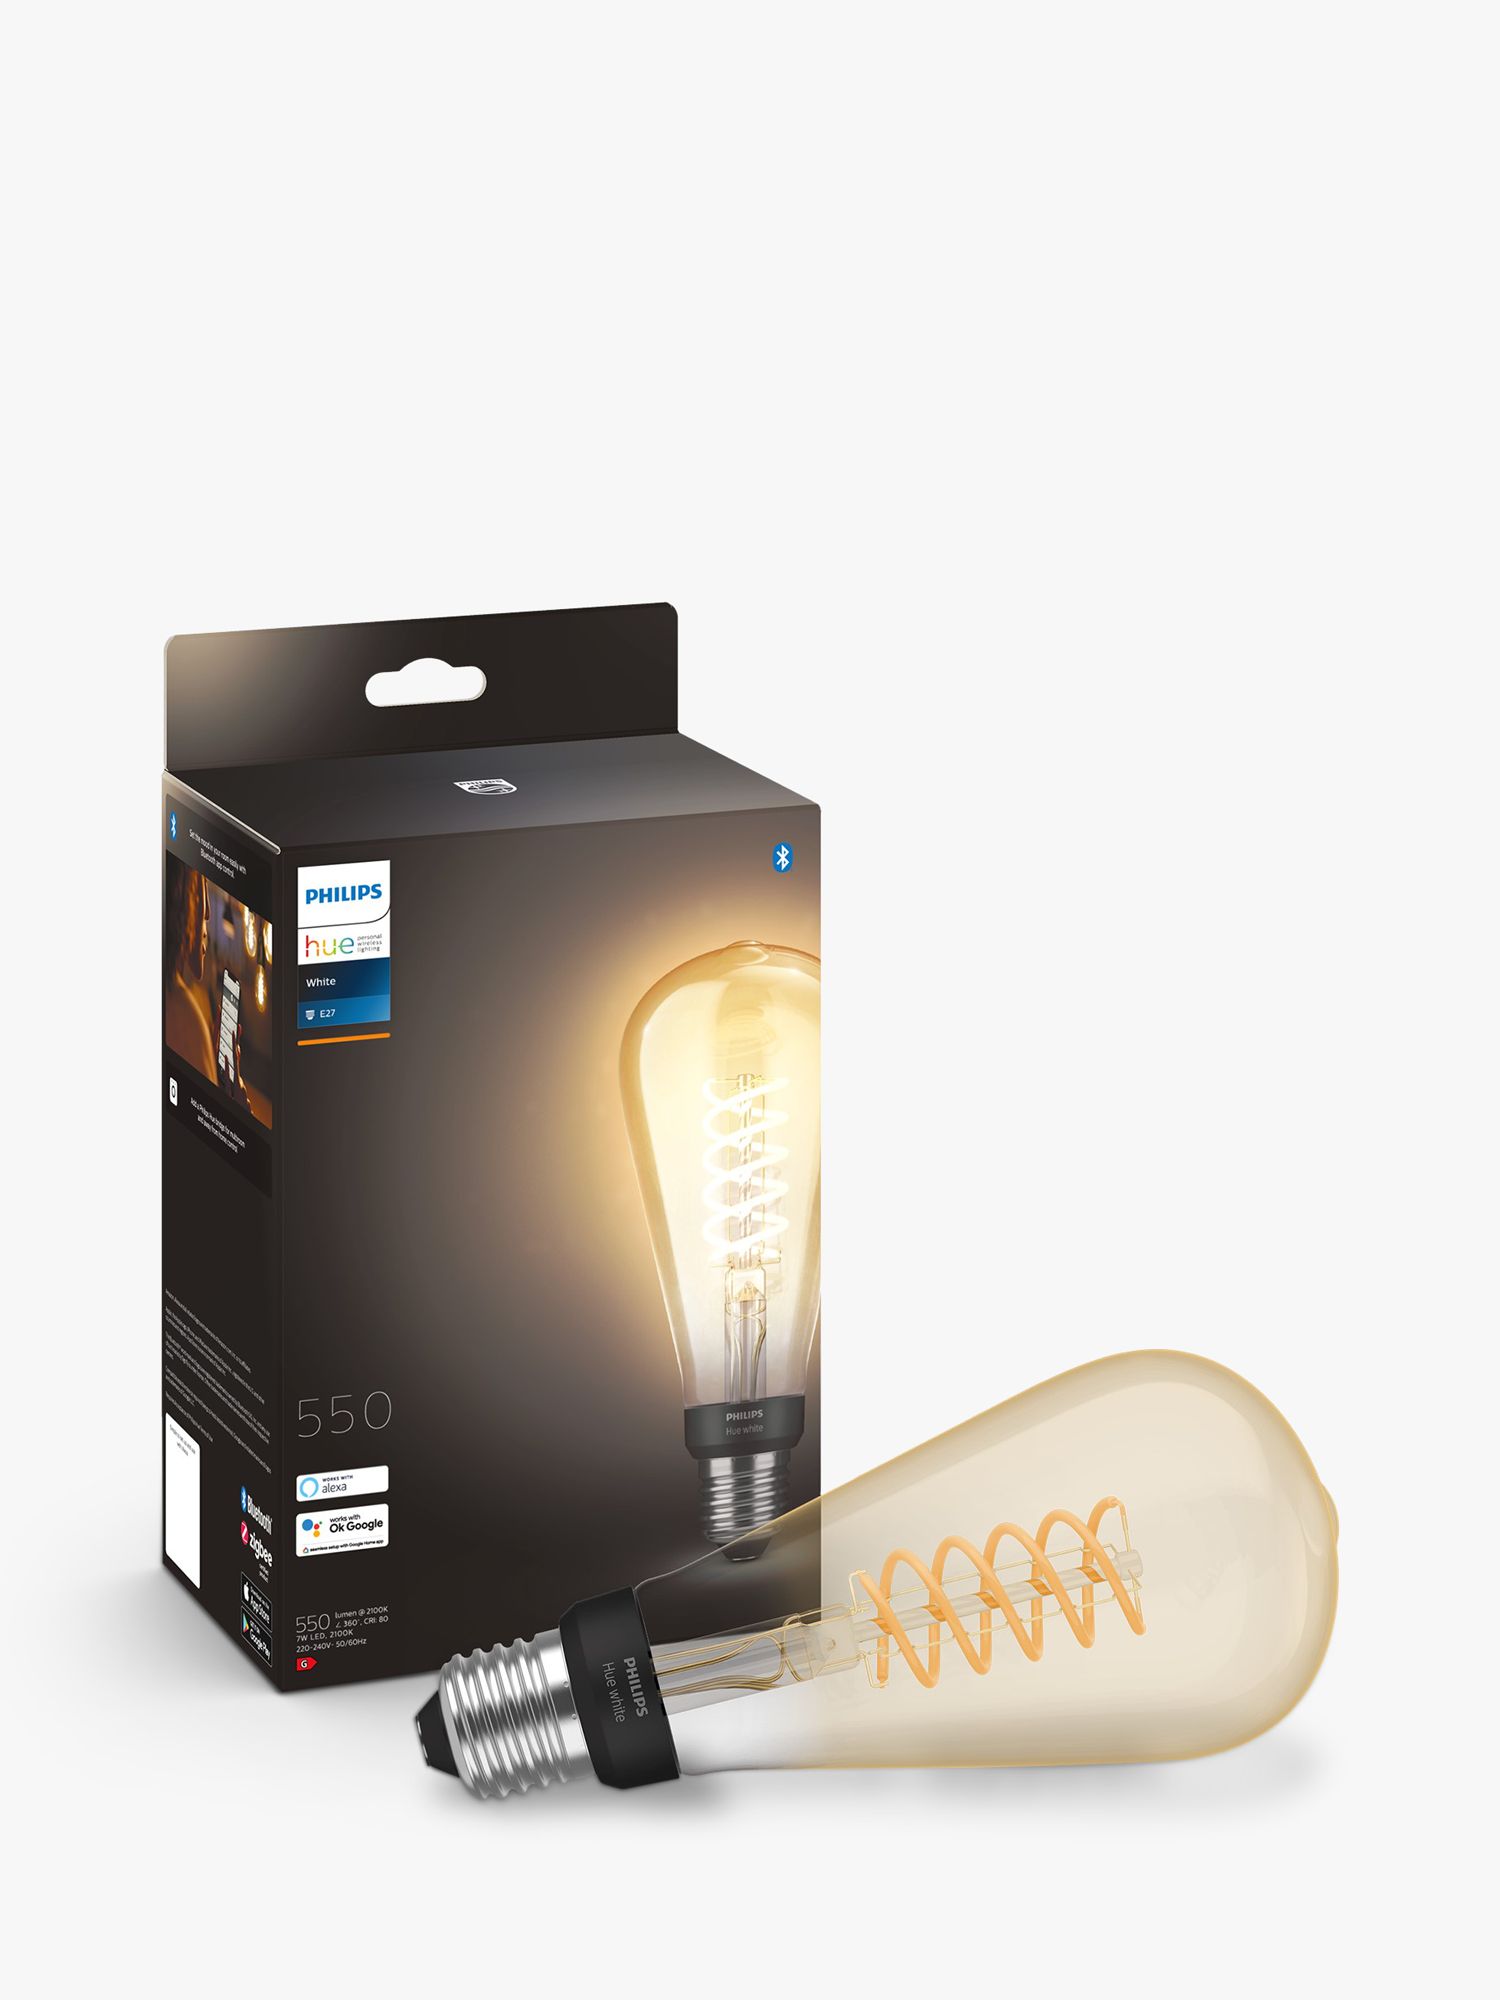 Photo of Philips hue white 7w e27 led single filament st72 dimmable smart bulb with bluetooth